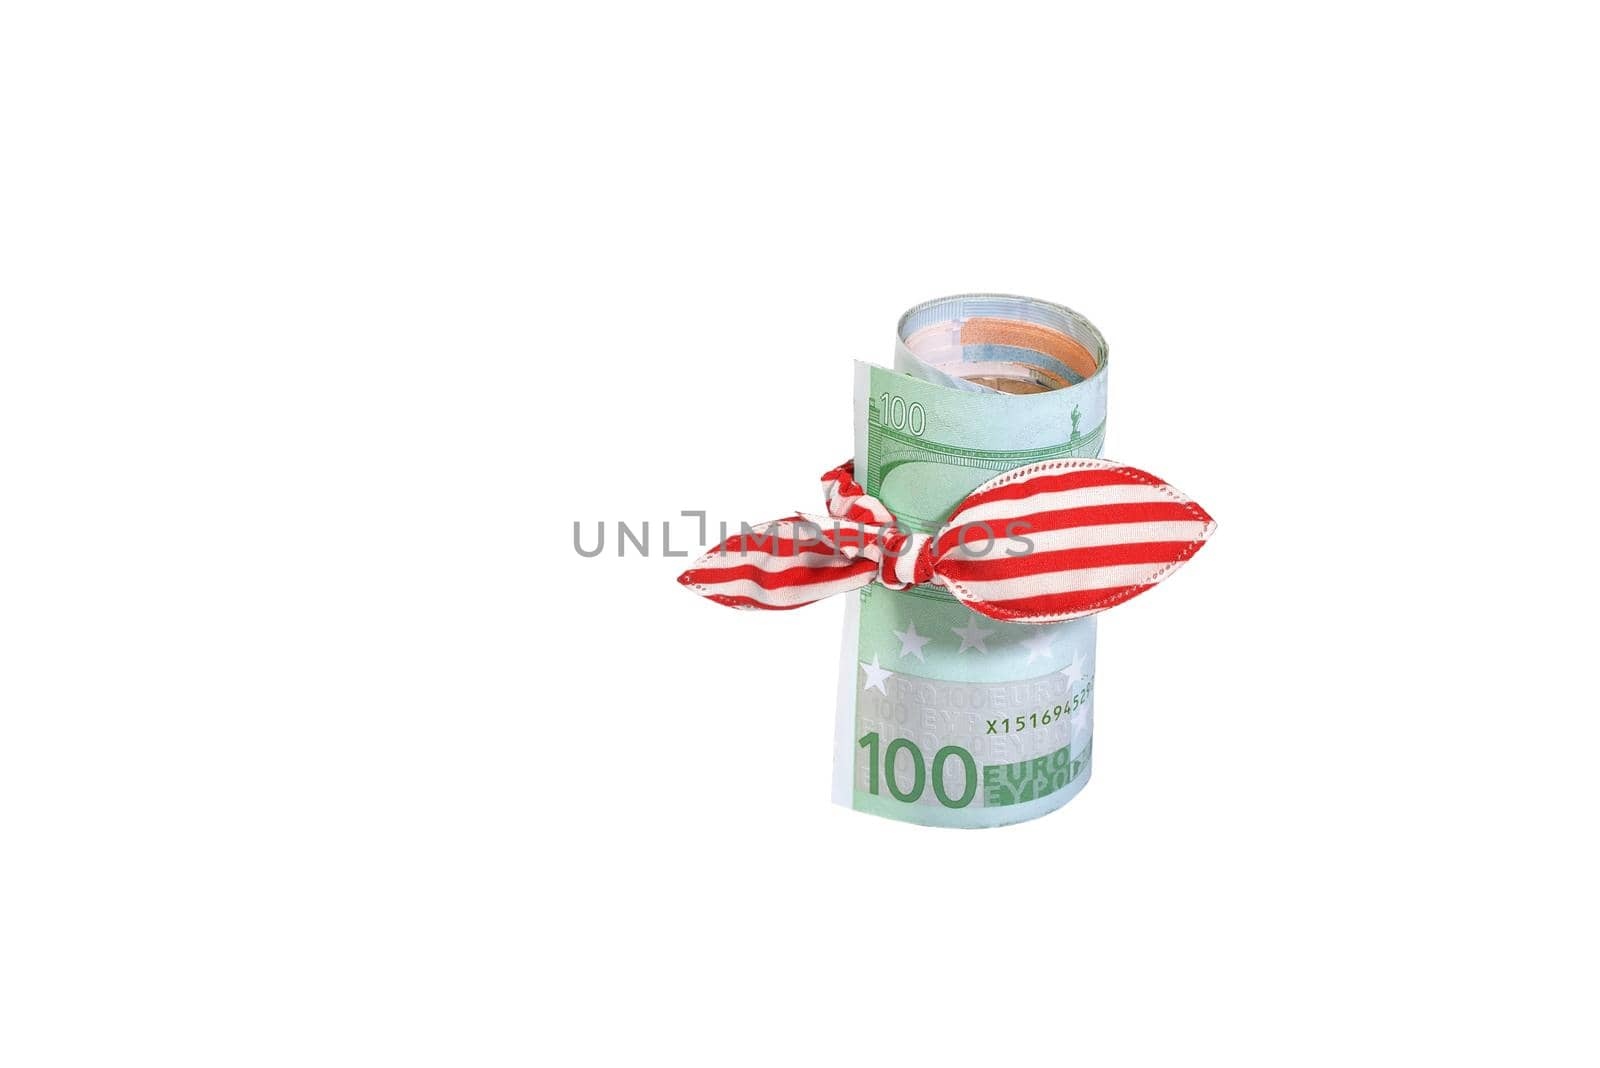 Hundred euros banknote curtailed by a tubule with red elastic band with a bow isolated on white